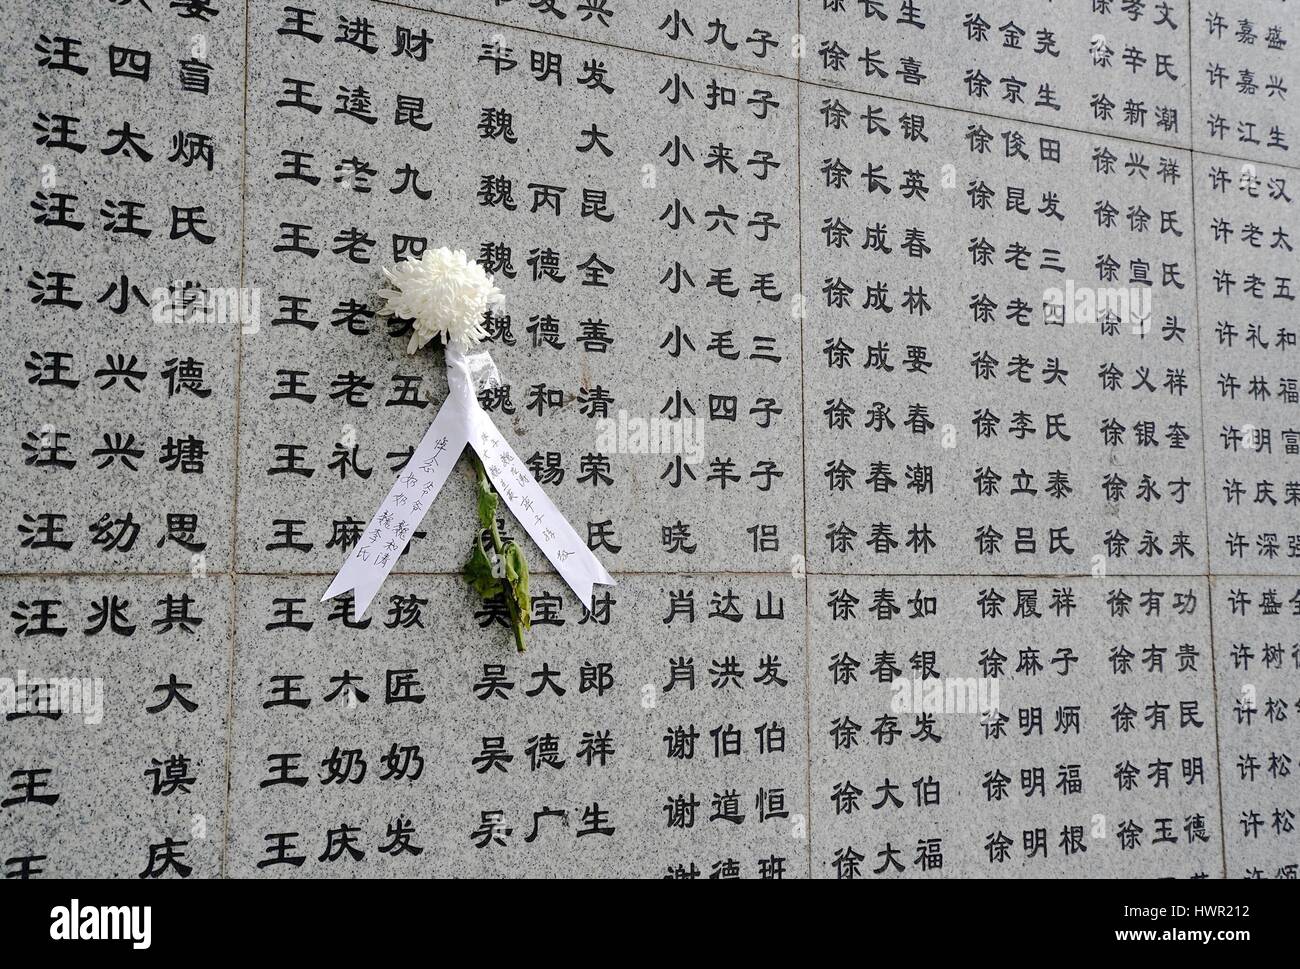 Nanjing, China's Jiangsu Province. 4th Apr, 2017. A paper flower is seen on the wall remembering the victims at the Memorial Hall of the Victims in Nanjing Massacre by Japanese Invaders in Nanjing, capital of east China's Jiangsu Province, April 4, 2017. A mourning ceremony was held here by survivors and family members of victims in the Nanjing Massacre during Tomb-Sweeping Day, or Qingming, when Chinese people commemorate their deceased loved ones by visiting tombs. Credit: Han Yuqing/Xinhua/Alamy Live News Stock Photo